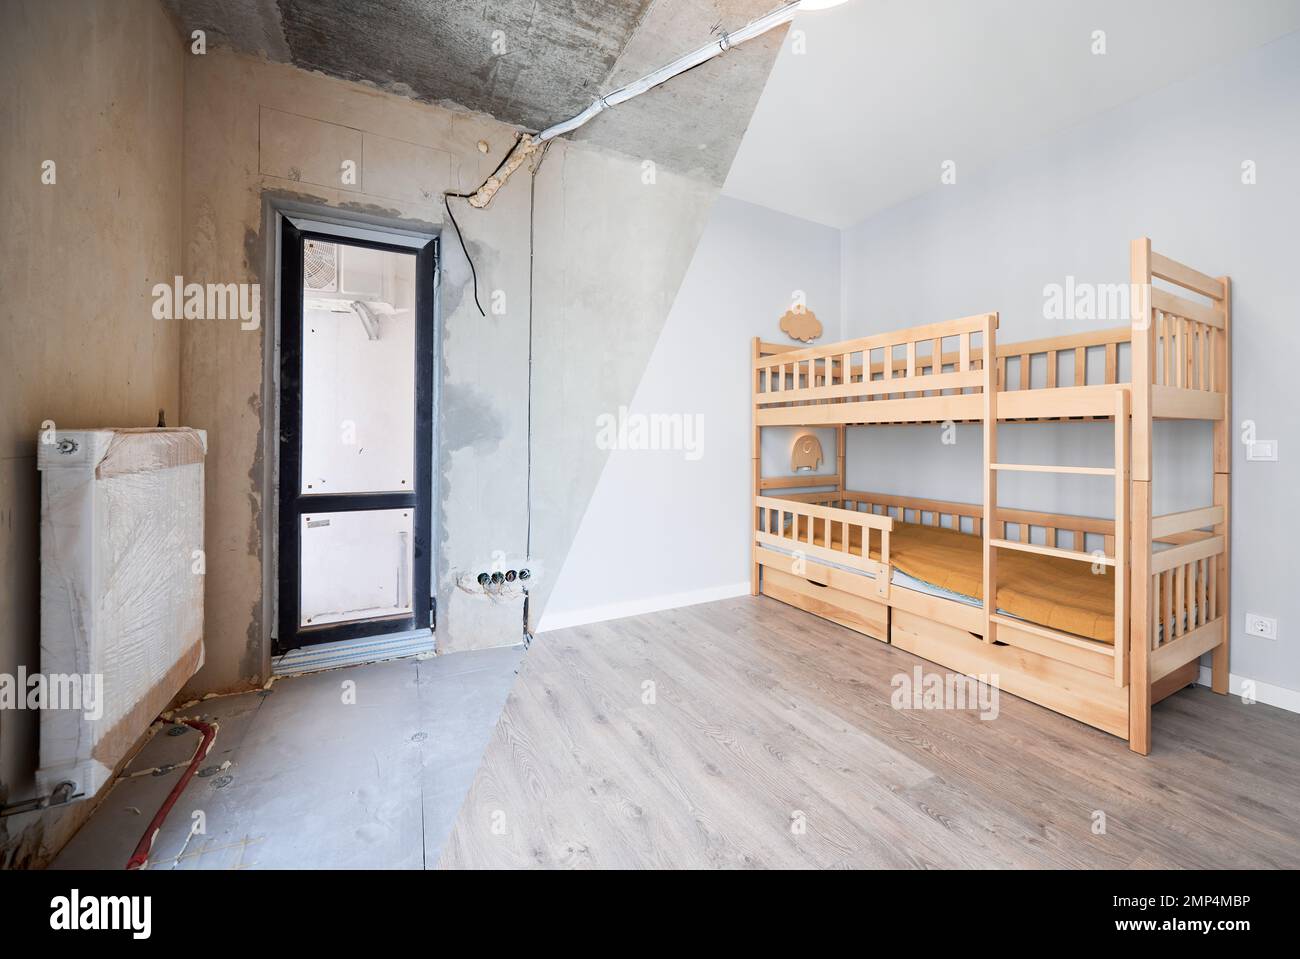 Comparison of children room with wooden bunk bed before and after restoration. Old apartment room with brick wall and new renovated flat with parquet floor and kid house bed. Stock Photo